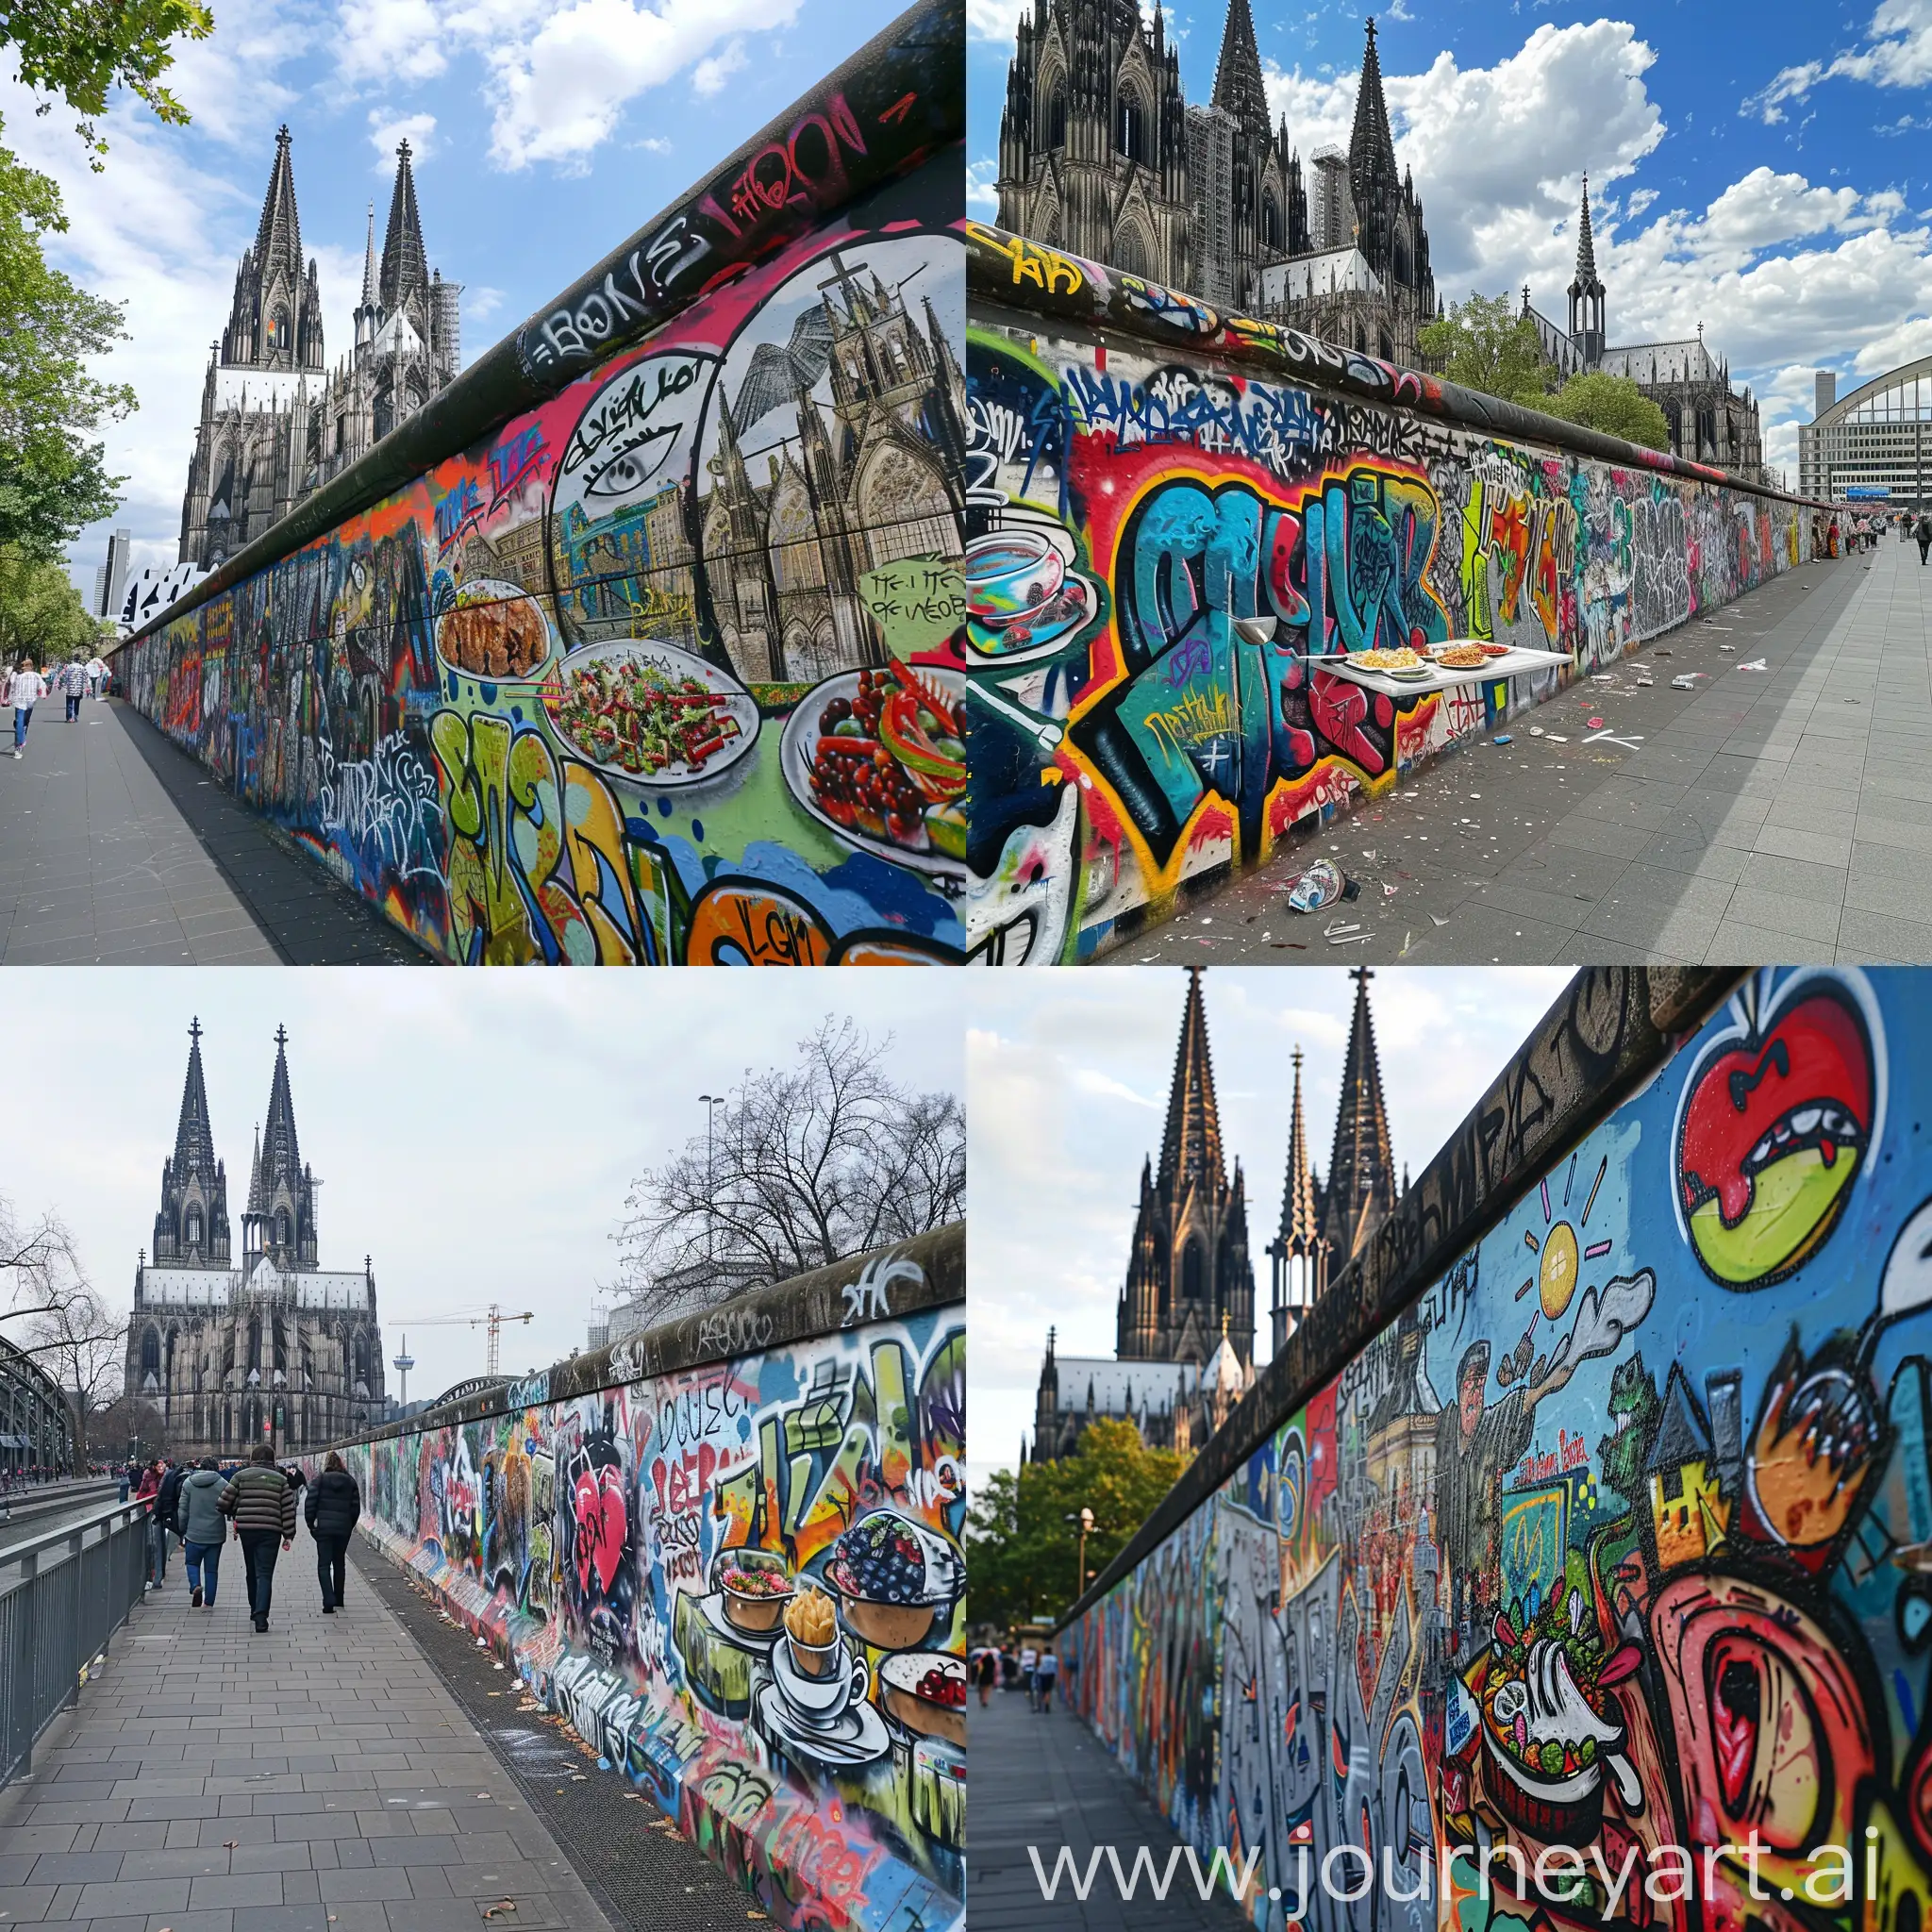 Cultural-Diversity-Feast-at-Cologne-Cathedral-Graffiti-Wall